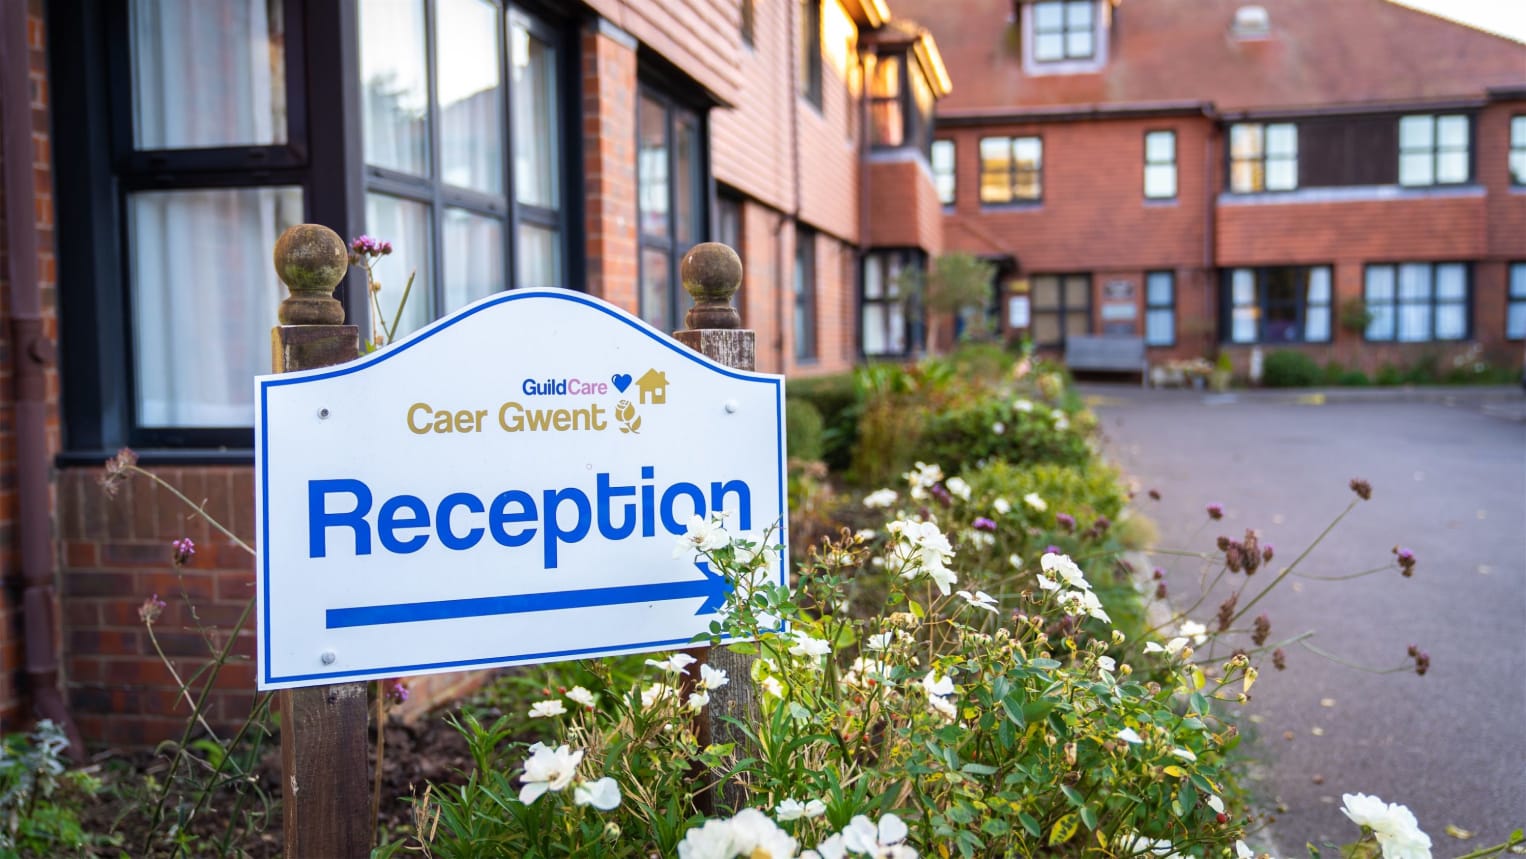 Caer Gwent Care Home in Worthing, West Sussex 